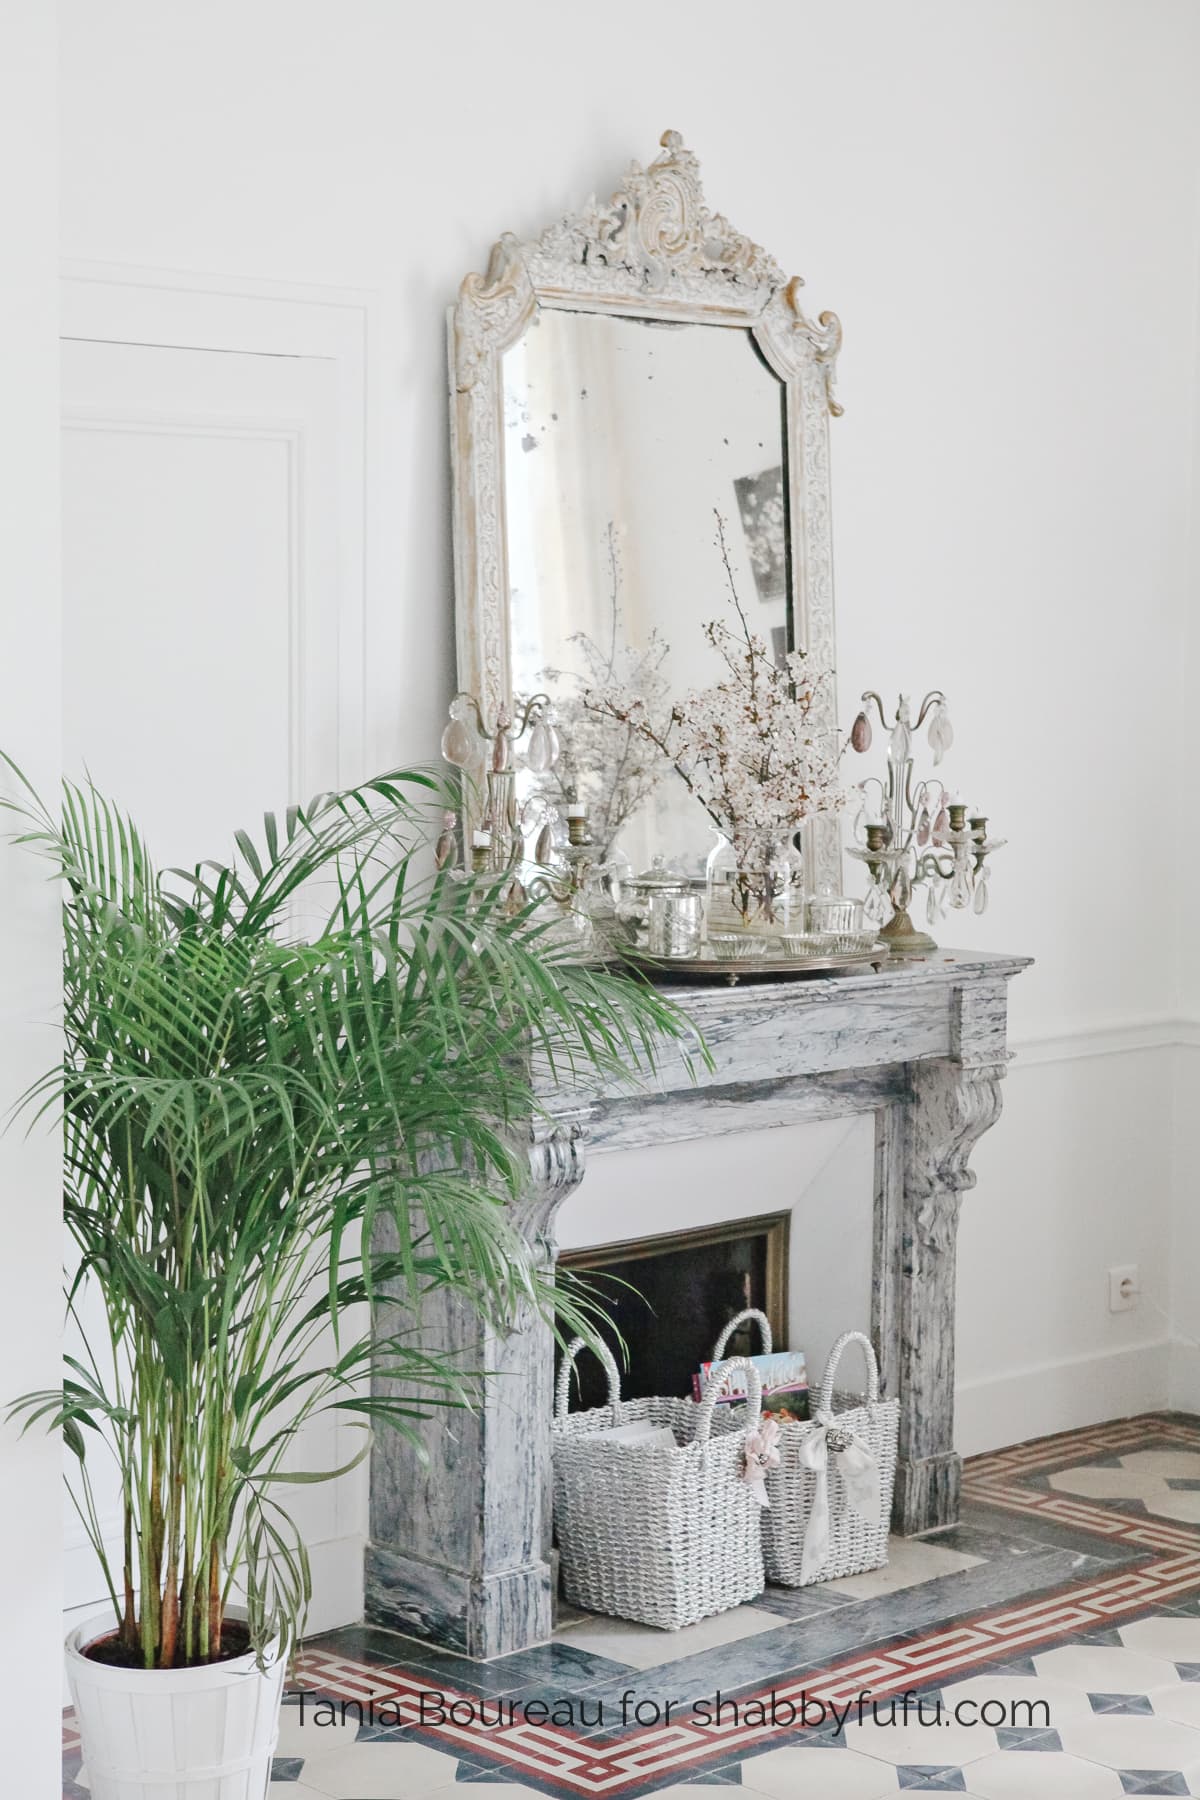 French country house tour Tania fireplace